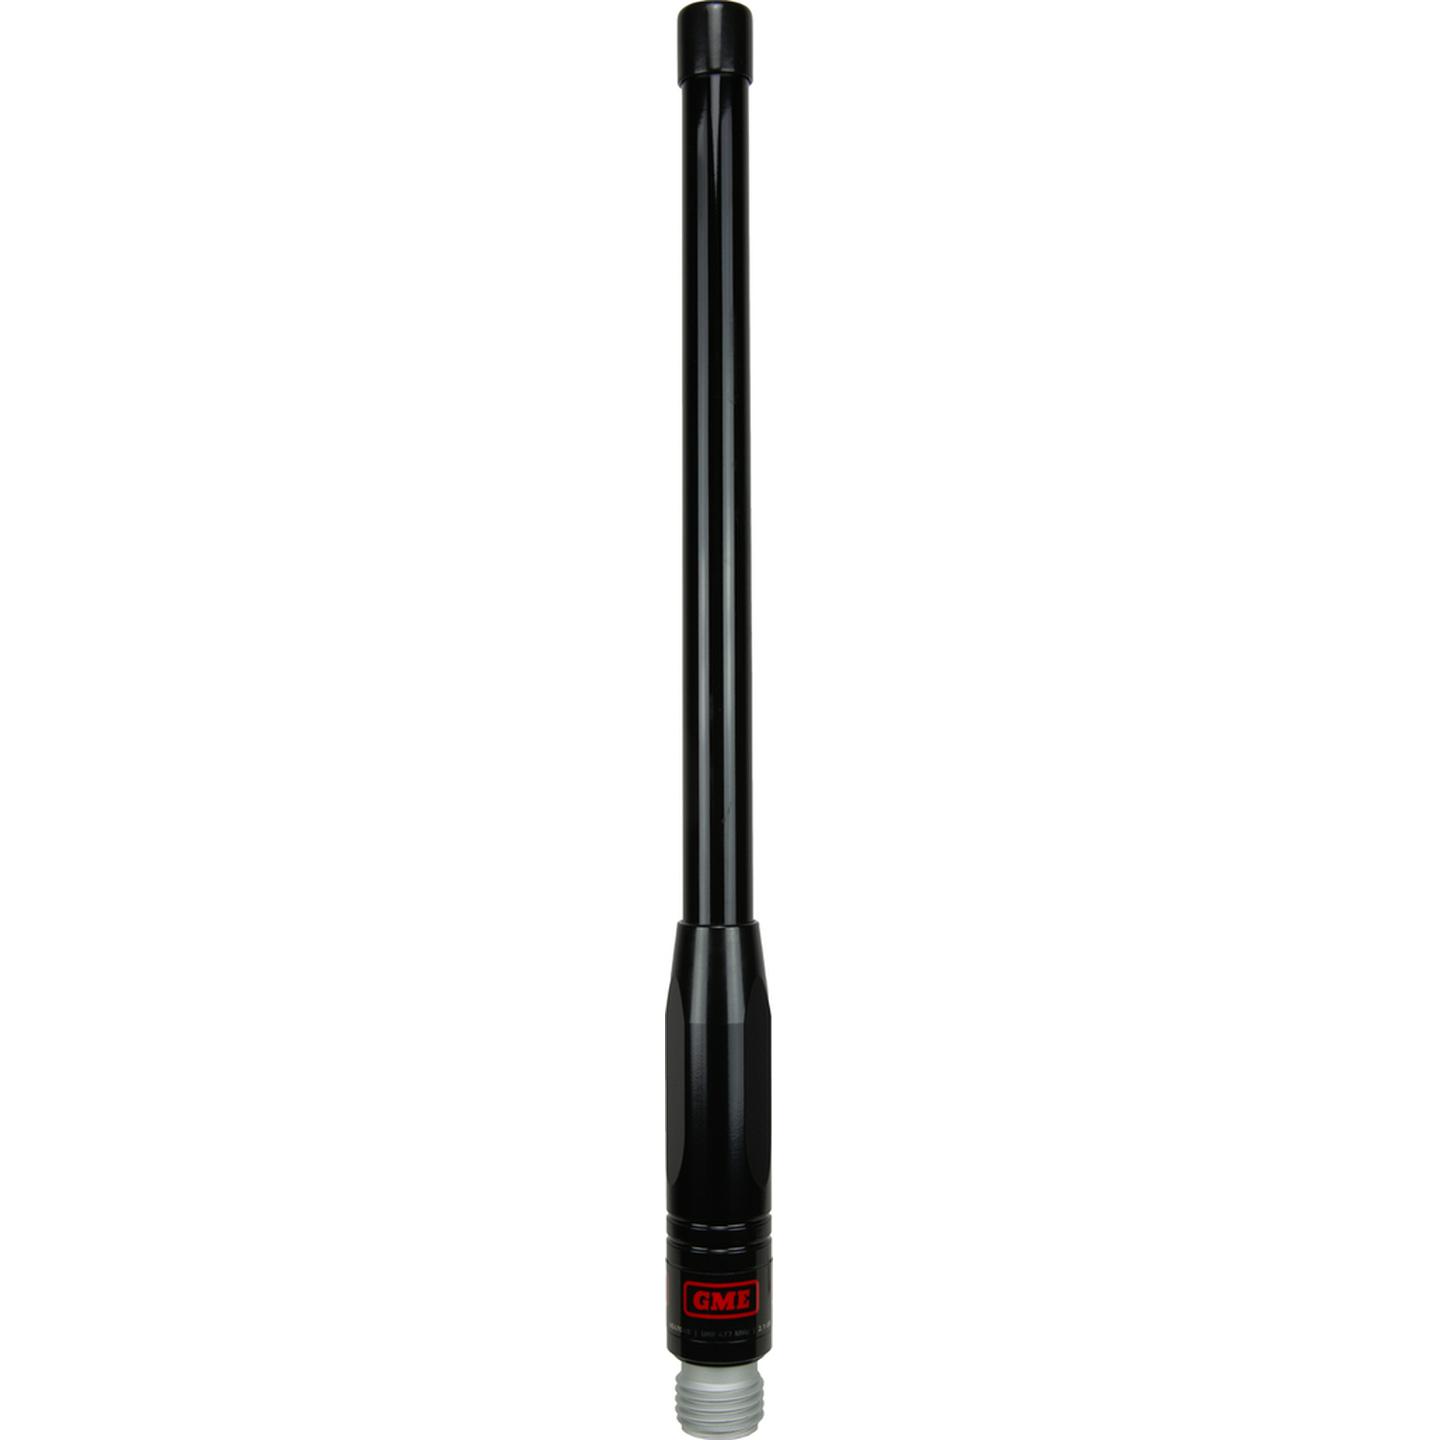 GME Antenna Whip - Suit AE4704B - Black